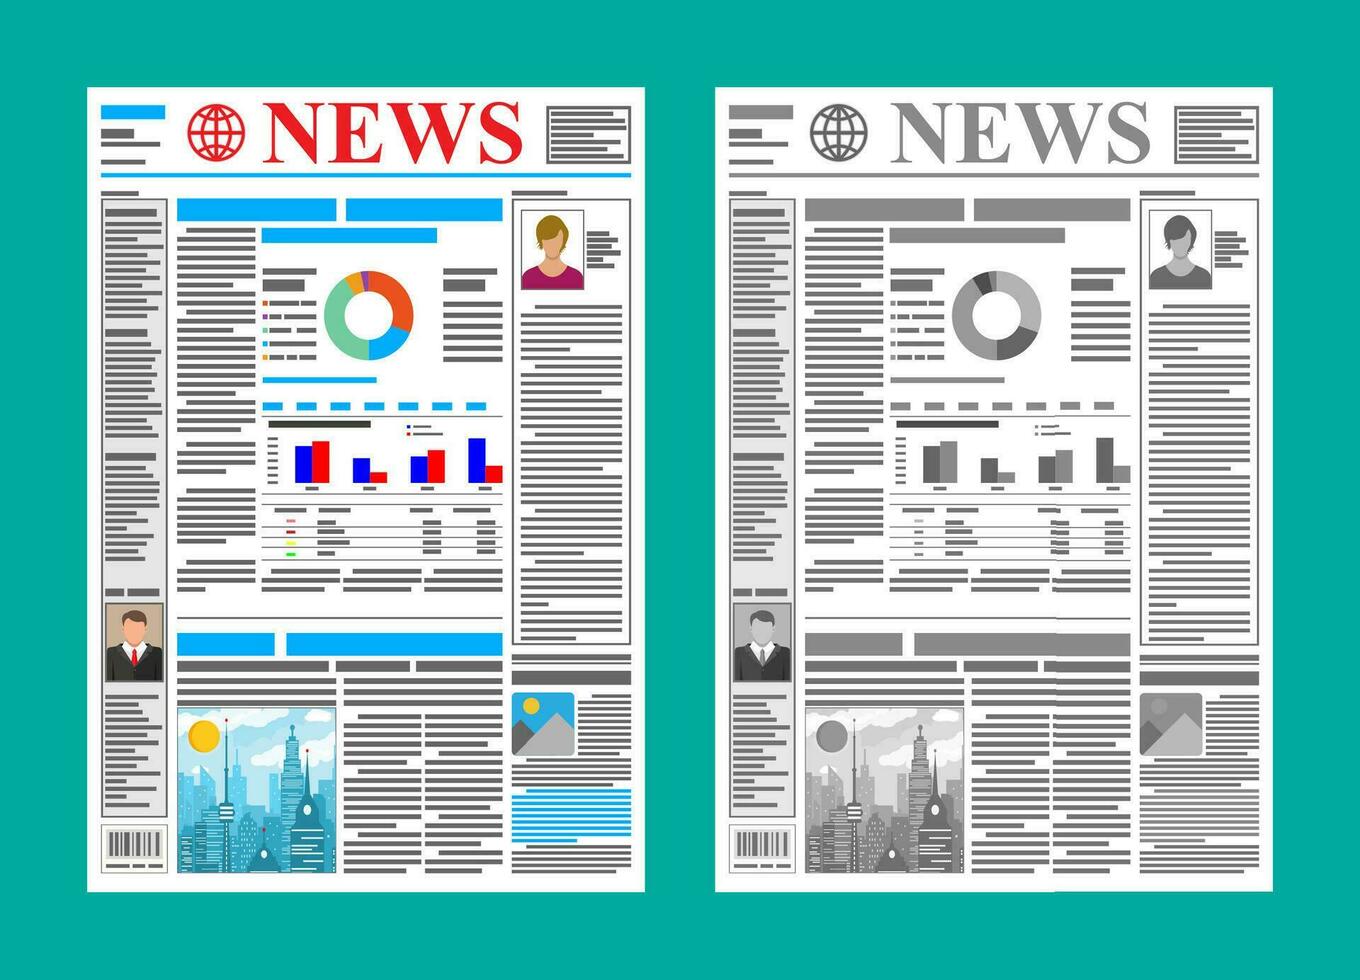 Daily newspaper in color and black and white. News journal design. Pages with various headlines, images, quotes, text and articles. Media, journalism and press. Vector illustration in flat style.